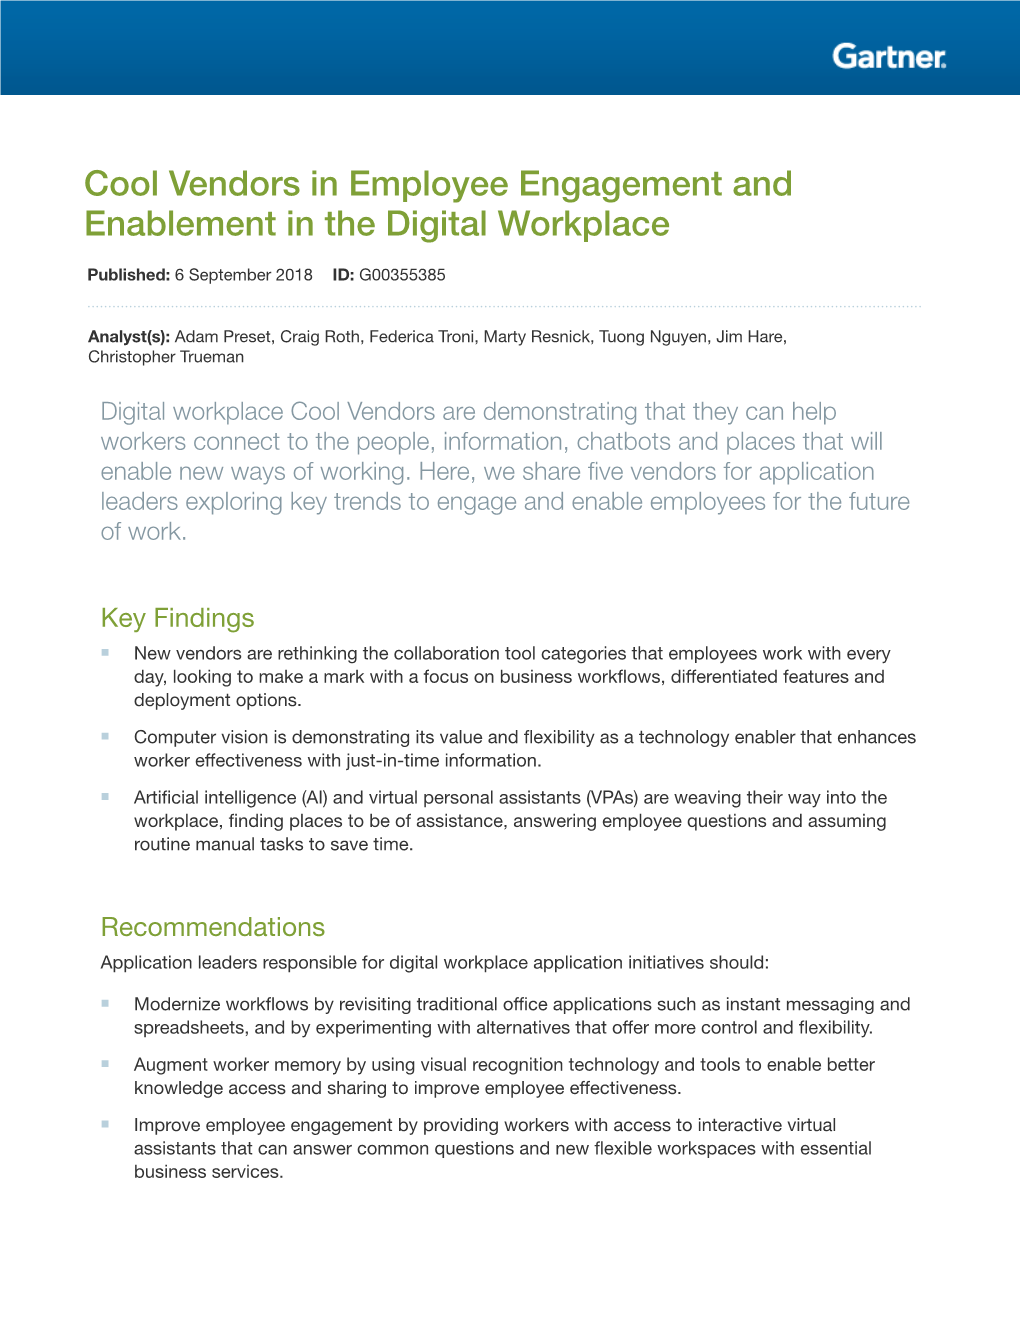 Cool Vendors in Employee Engagement and Enablement in the Digital Workplace